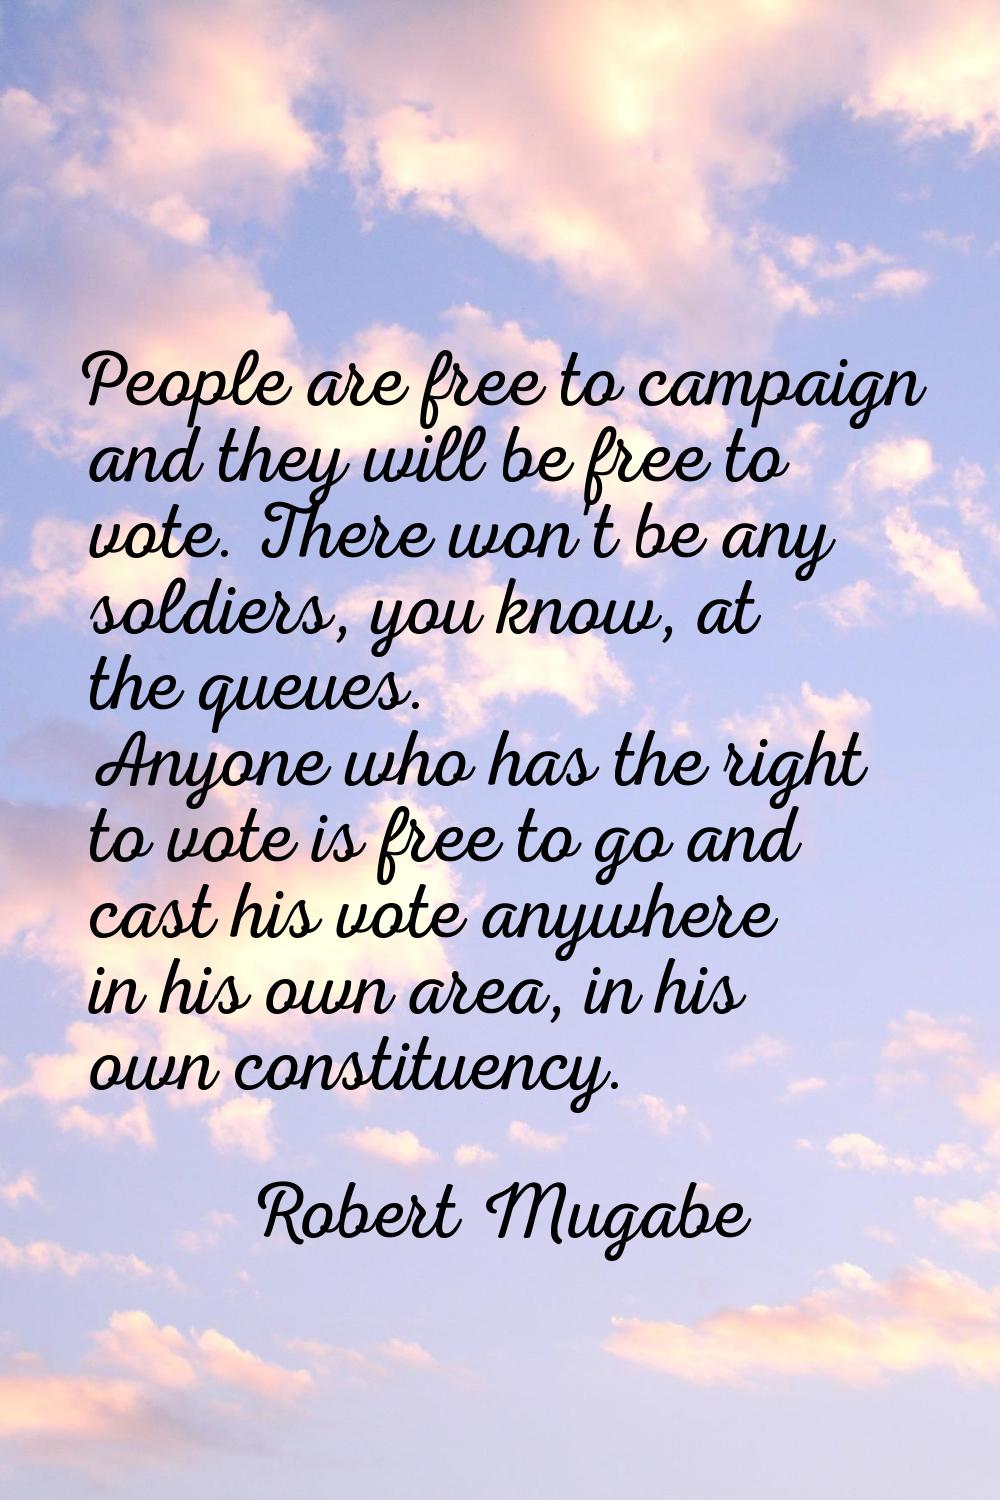 People are free to campaign and they will be free to vote. There won't be any soldiers, you know, a